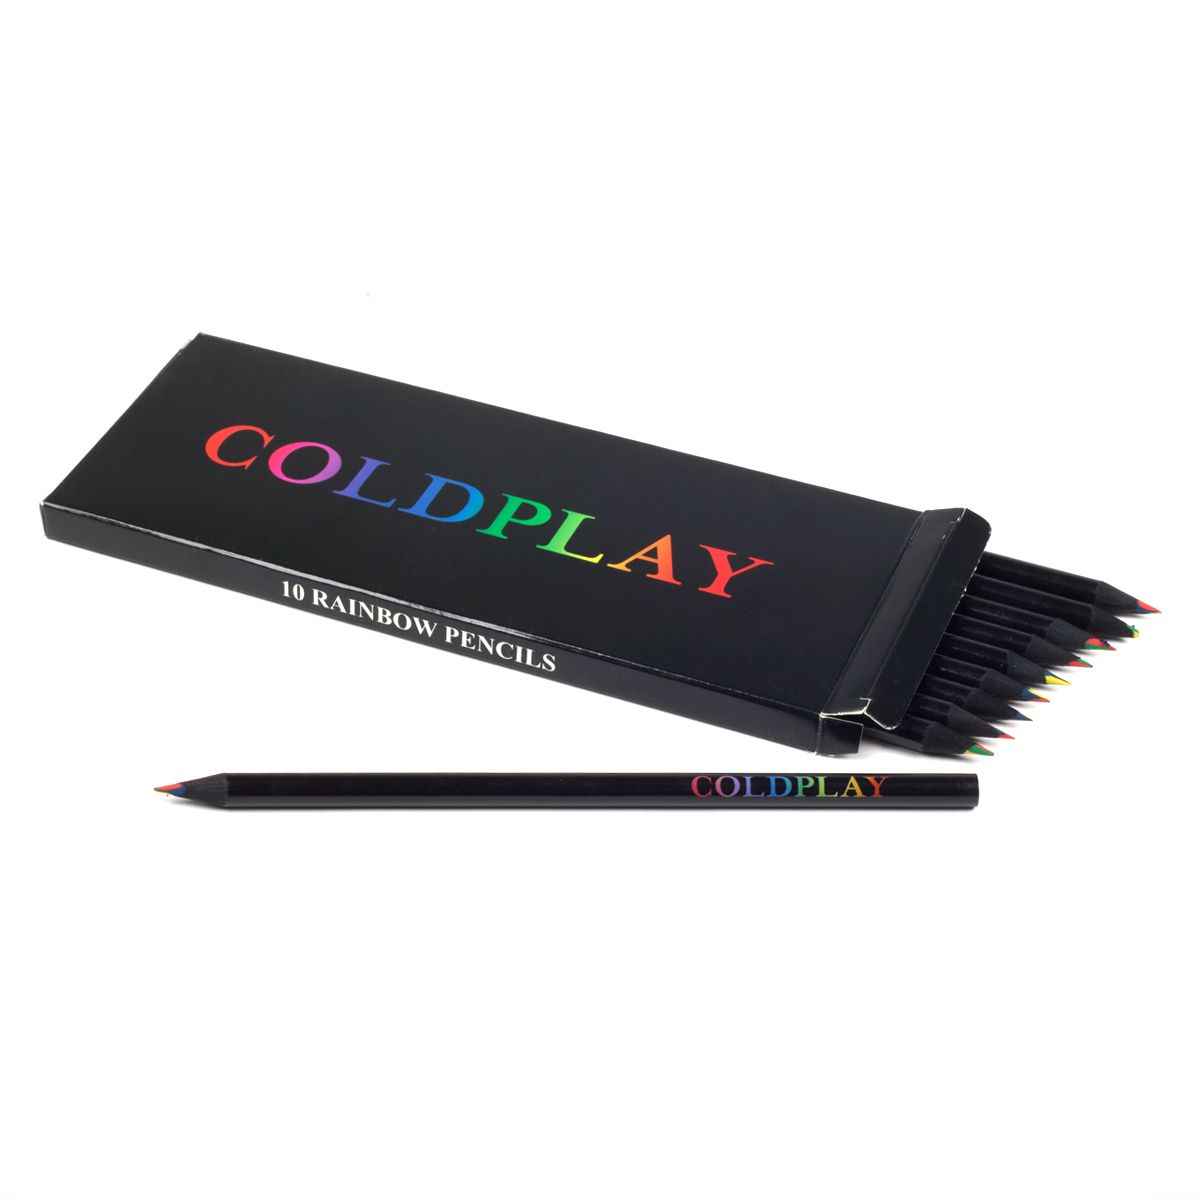 New rainbow pencils in the Coldplay Store